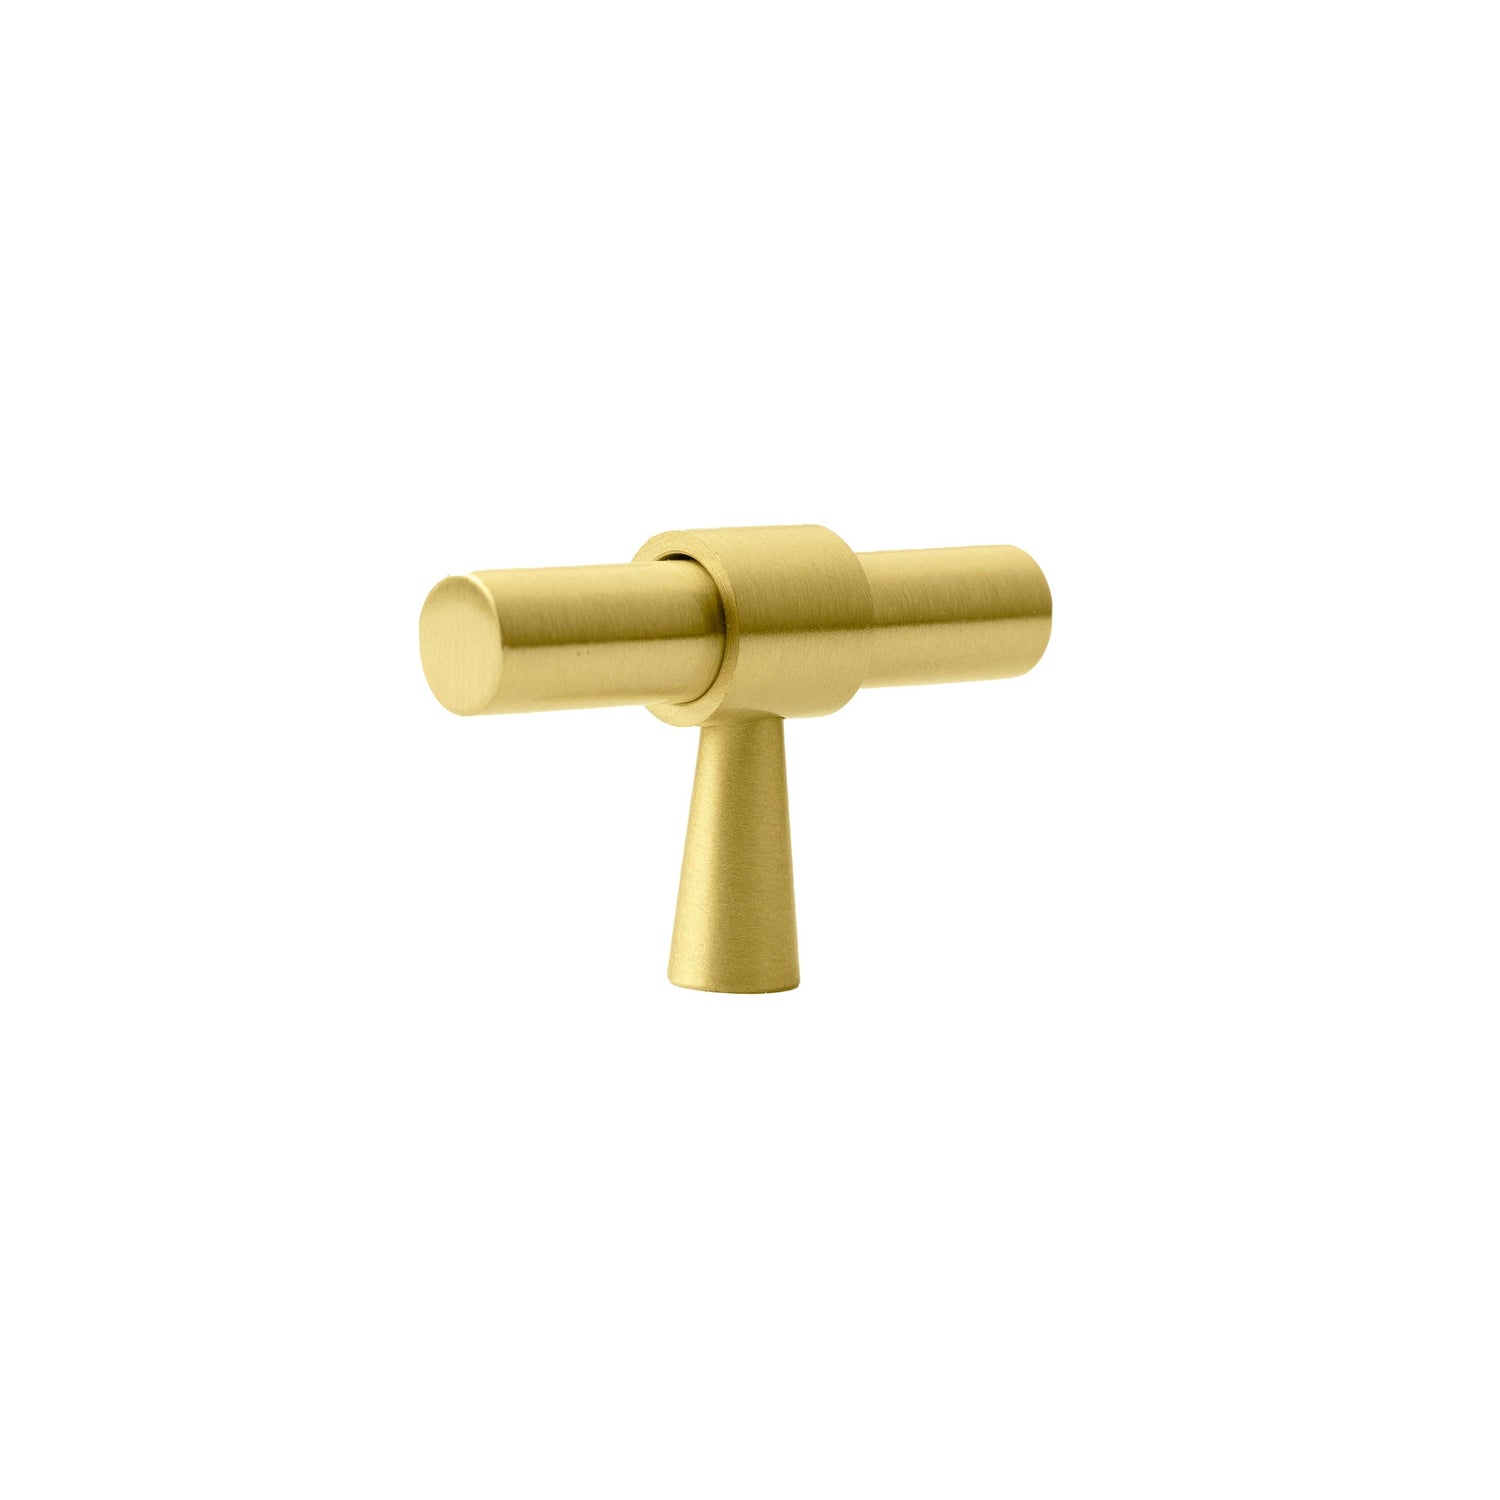 Seraphine Handle Handles 50mm / Gold / Brass - M A N T A R A